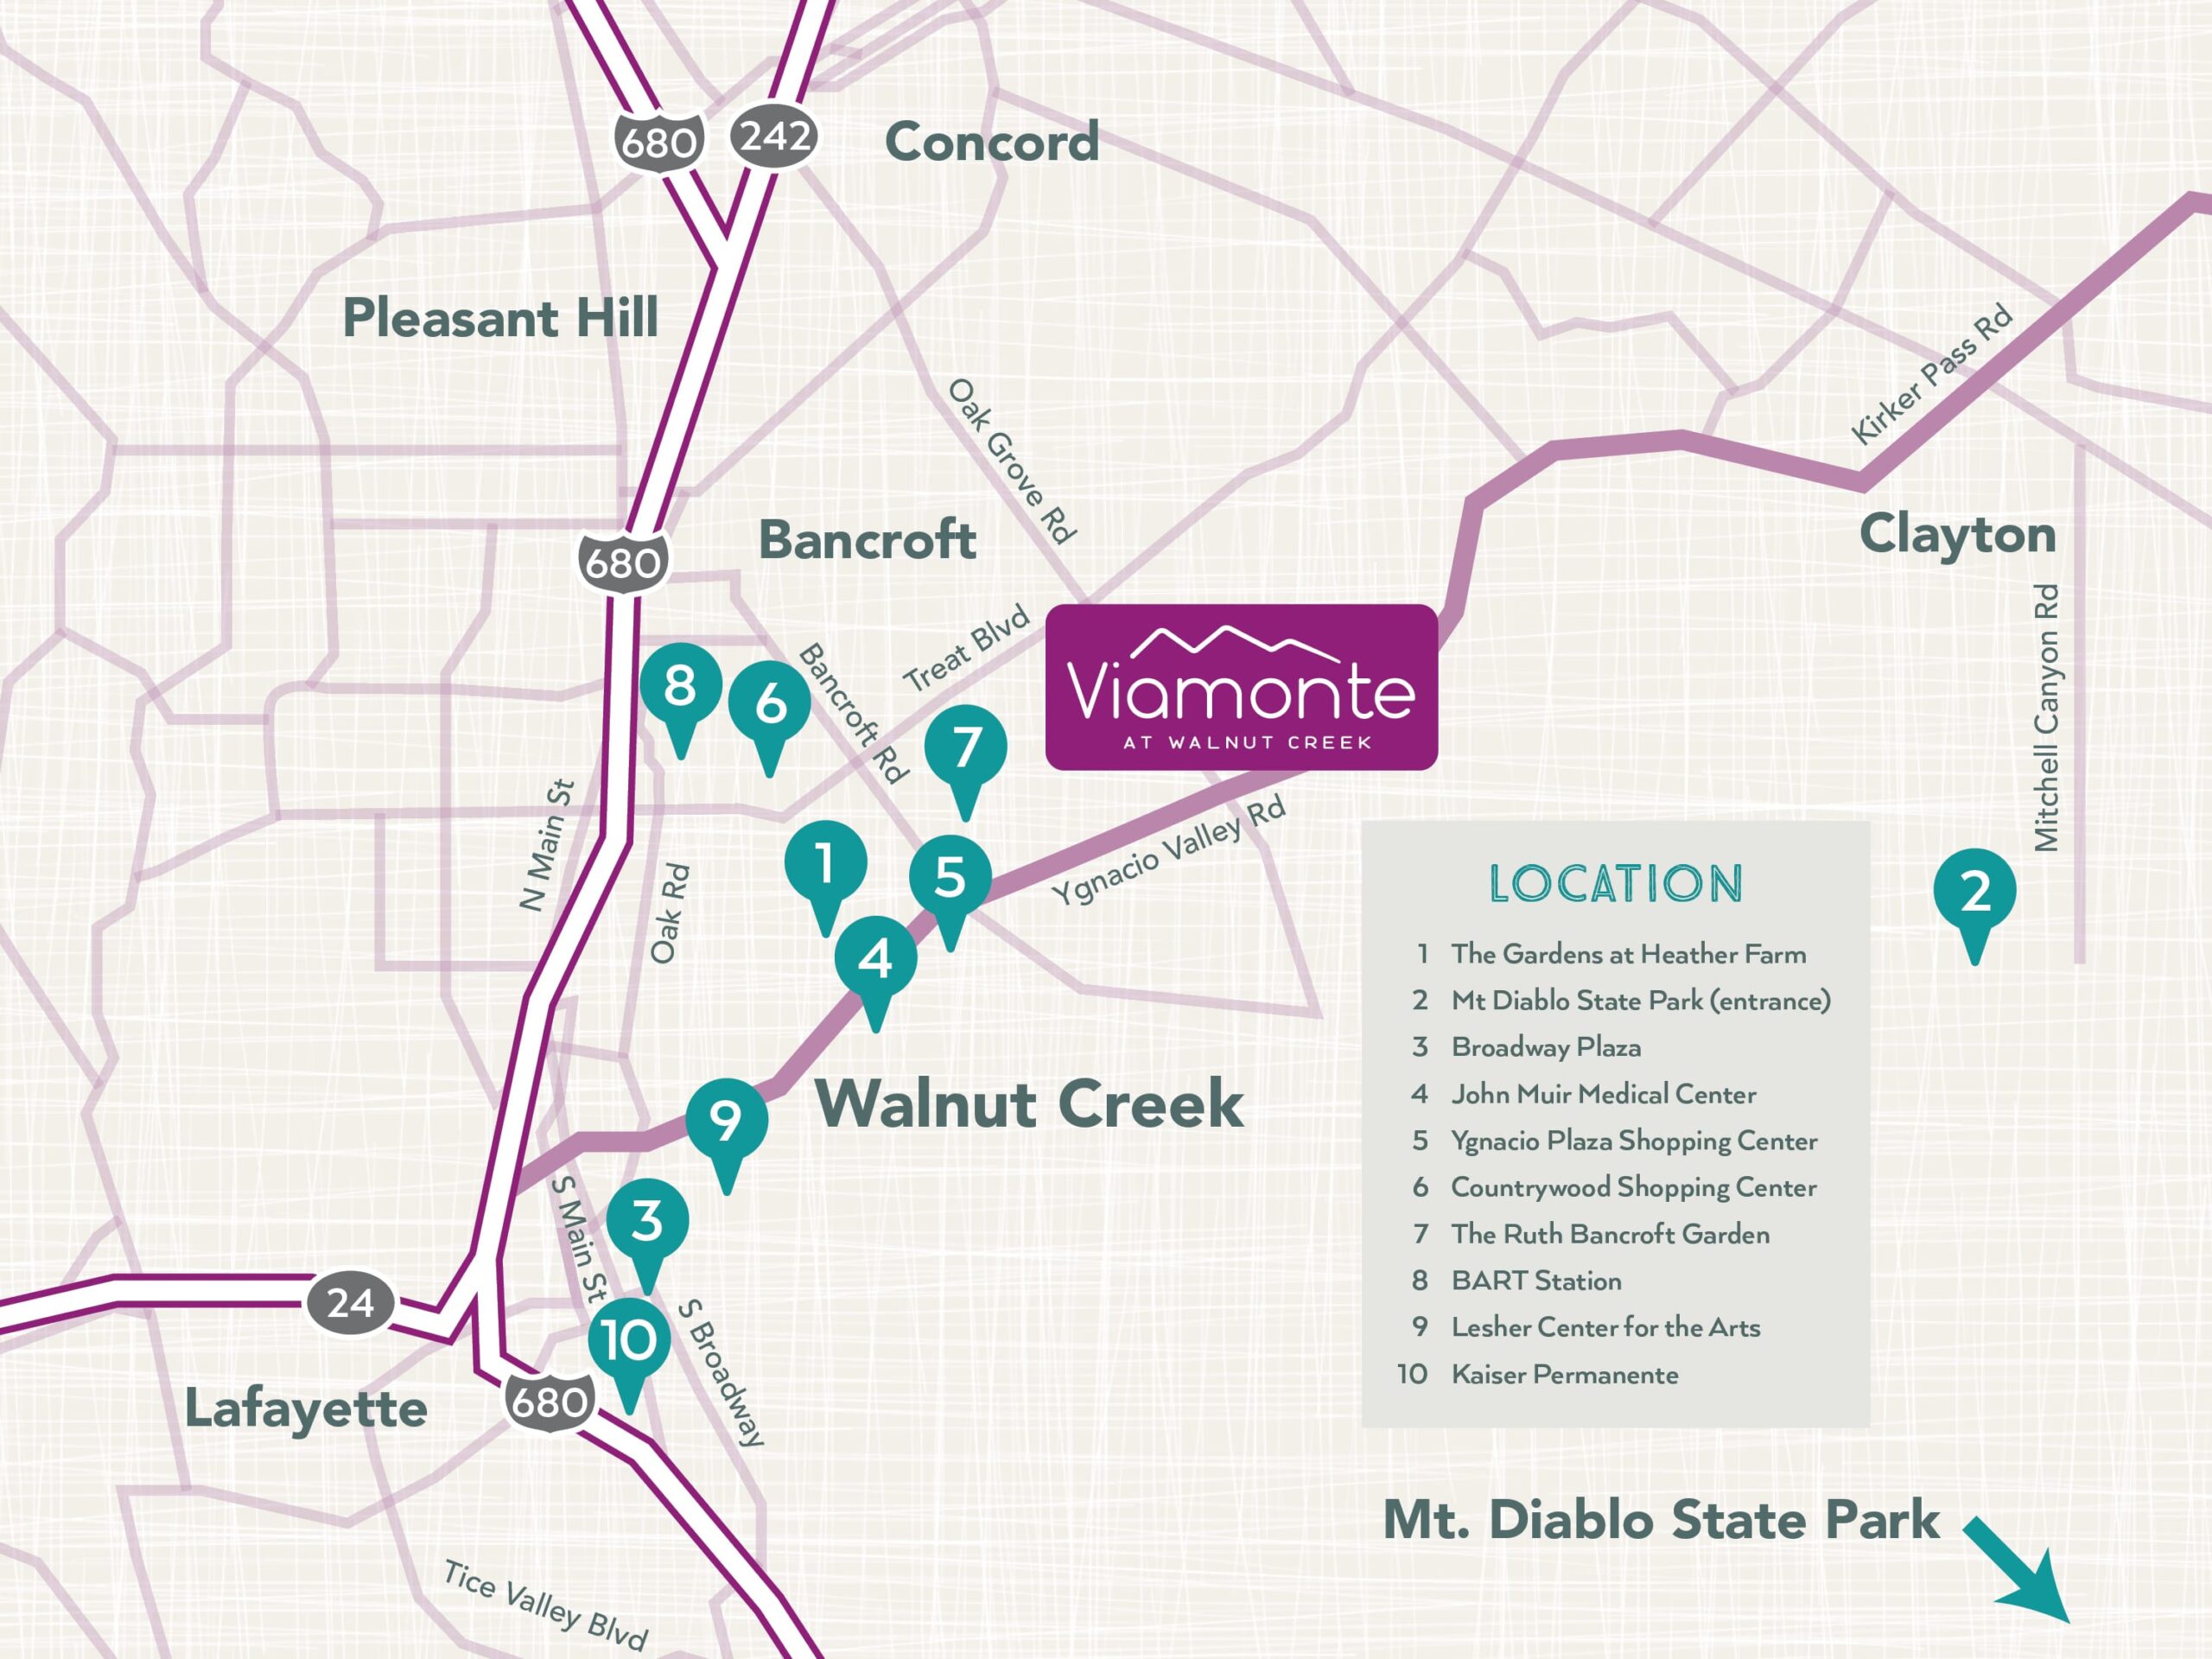 Map of Viamonte at Walnut Creek in San Fransisco. Nearby attractions: 1. The Gardens at Heather Farm 2. Mt. Diablo State Park (entrance) 3. Broadway Plaza 4. Join Muir Medical Center 5. Ygnacio Plaza Shopping Center 6. Countrywood Shopping Center 7. The Ruth Bancroft Garden 8. BART Station 9. Lesher Center For The Arts 10. Kaiser-Permanente